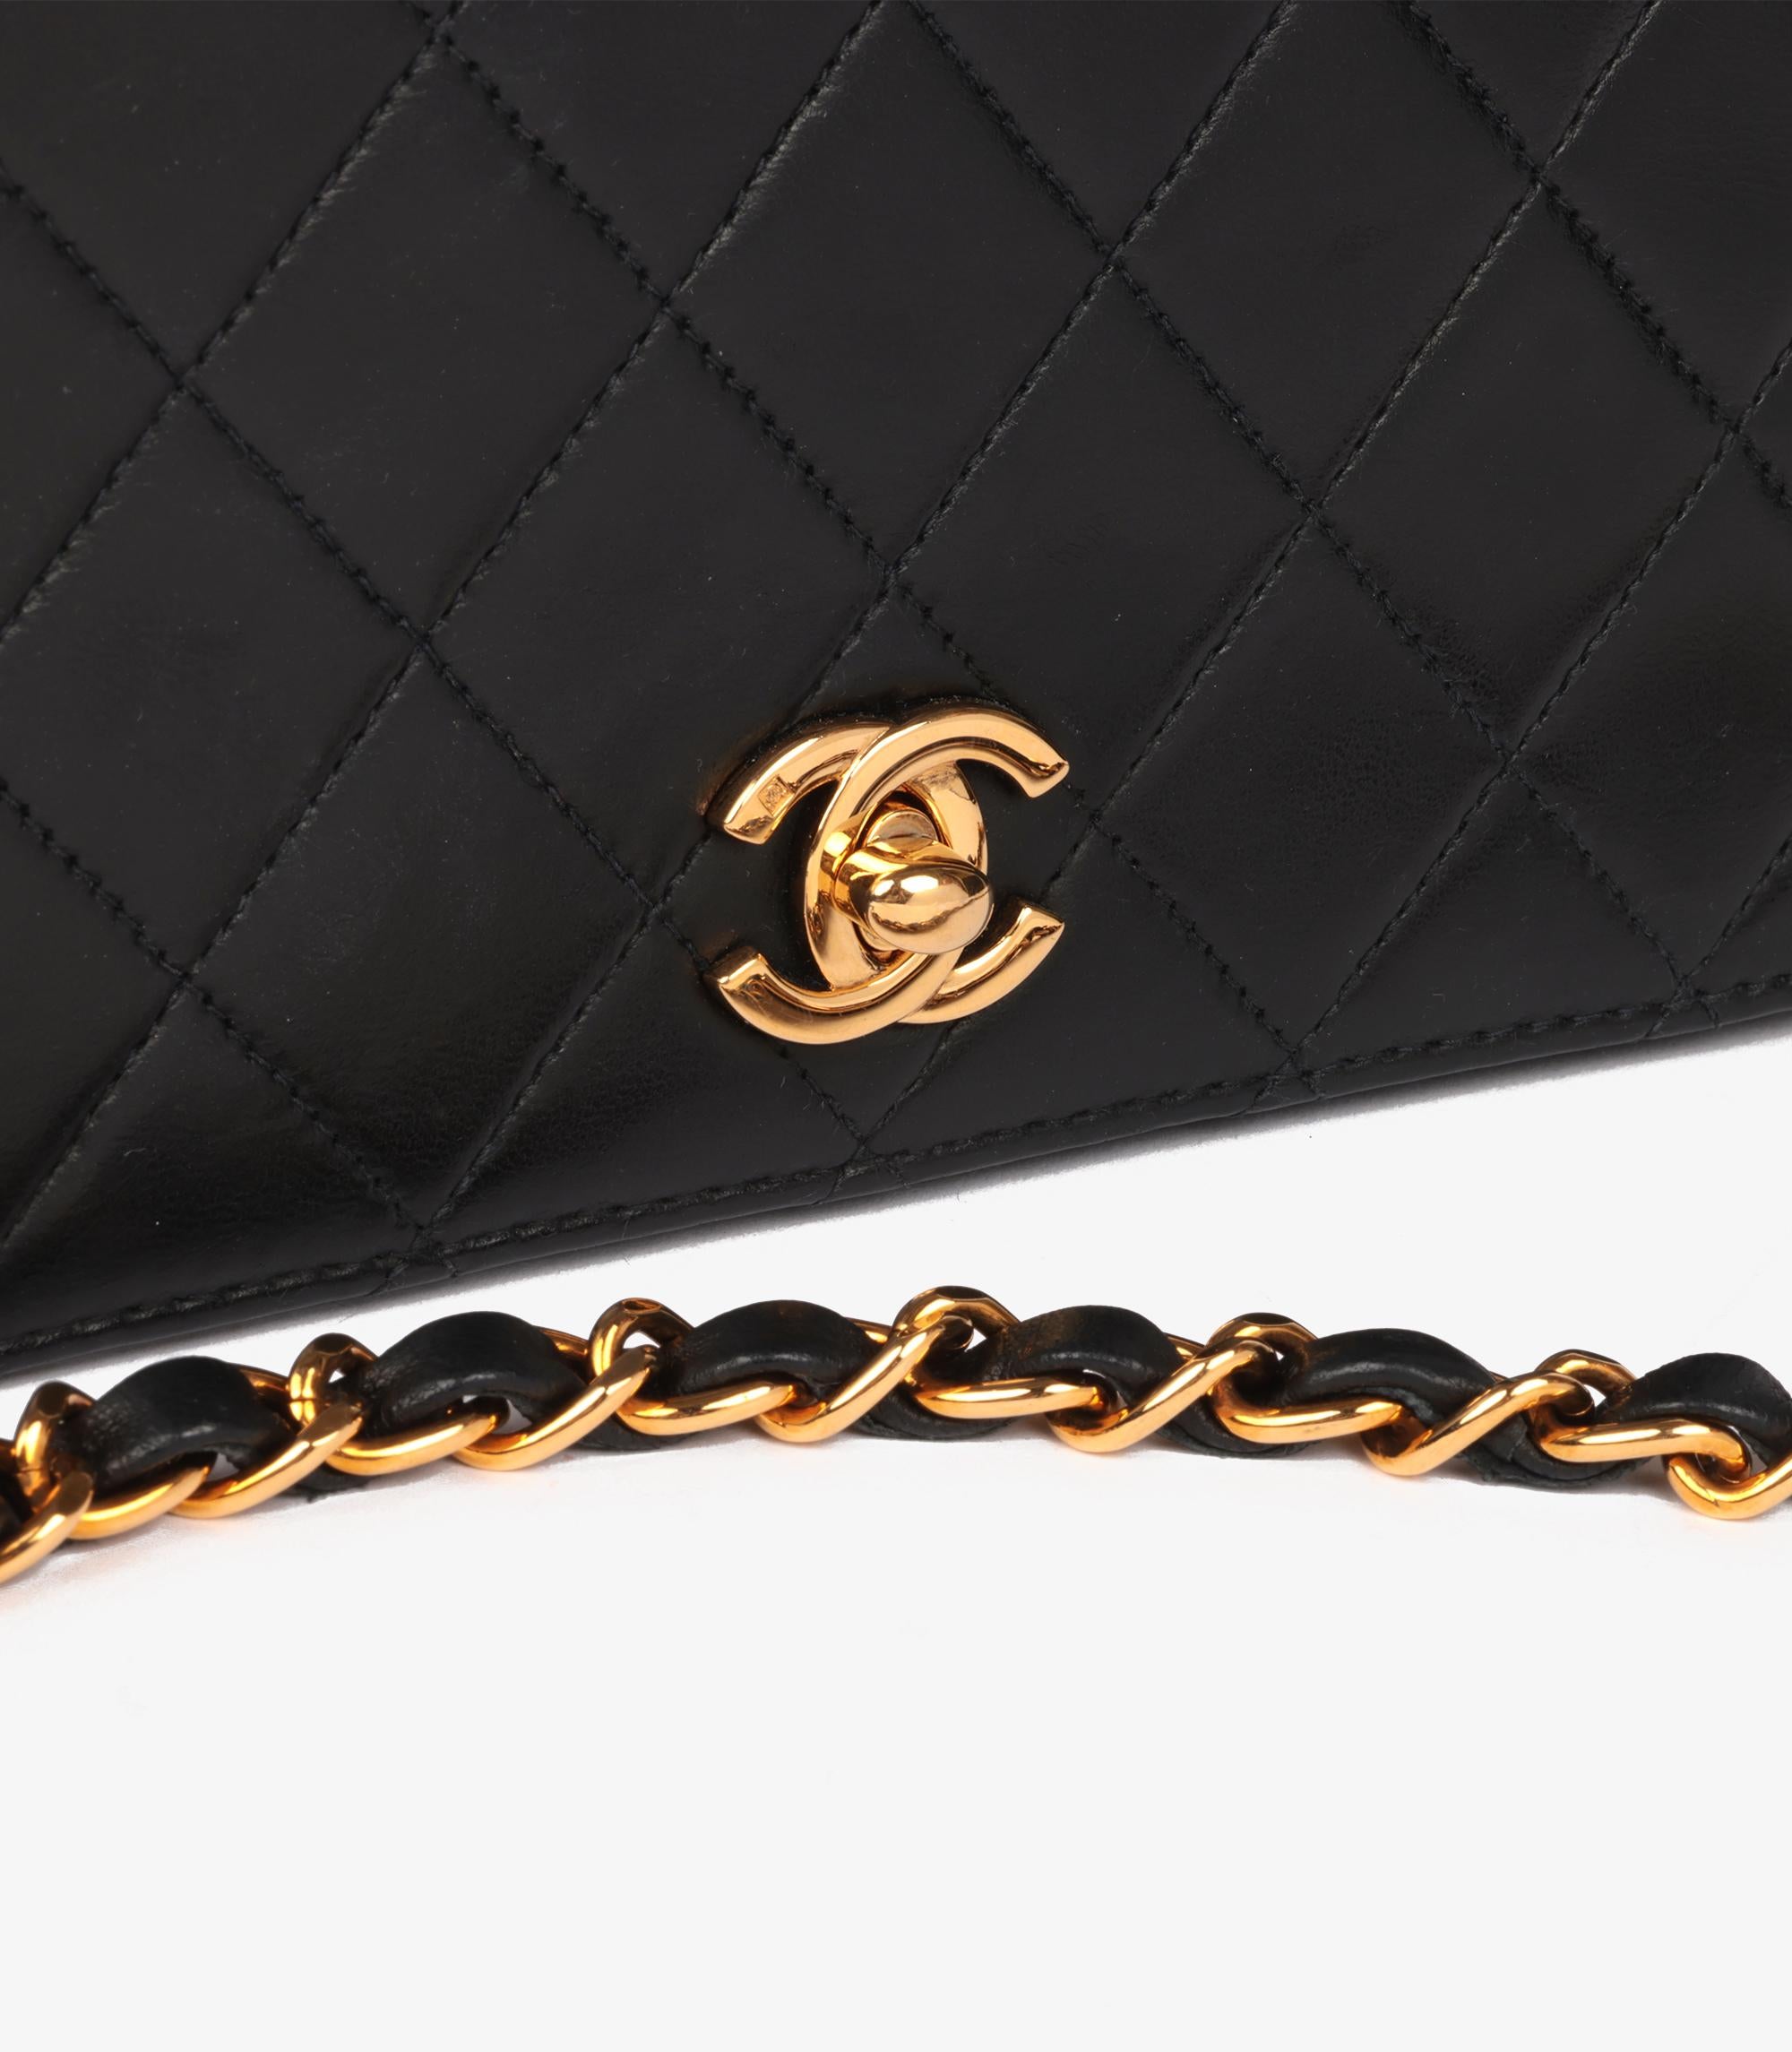 Chanel Black Quilted Lambskin Vintage Small Classic Single Full Flap Bag In Excellent Condition In Bishop's Stortford, Hertfordshire